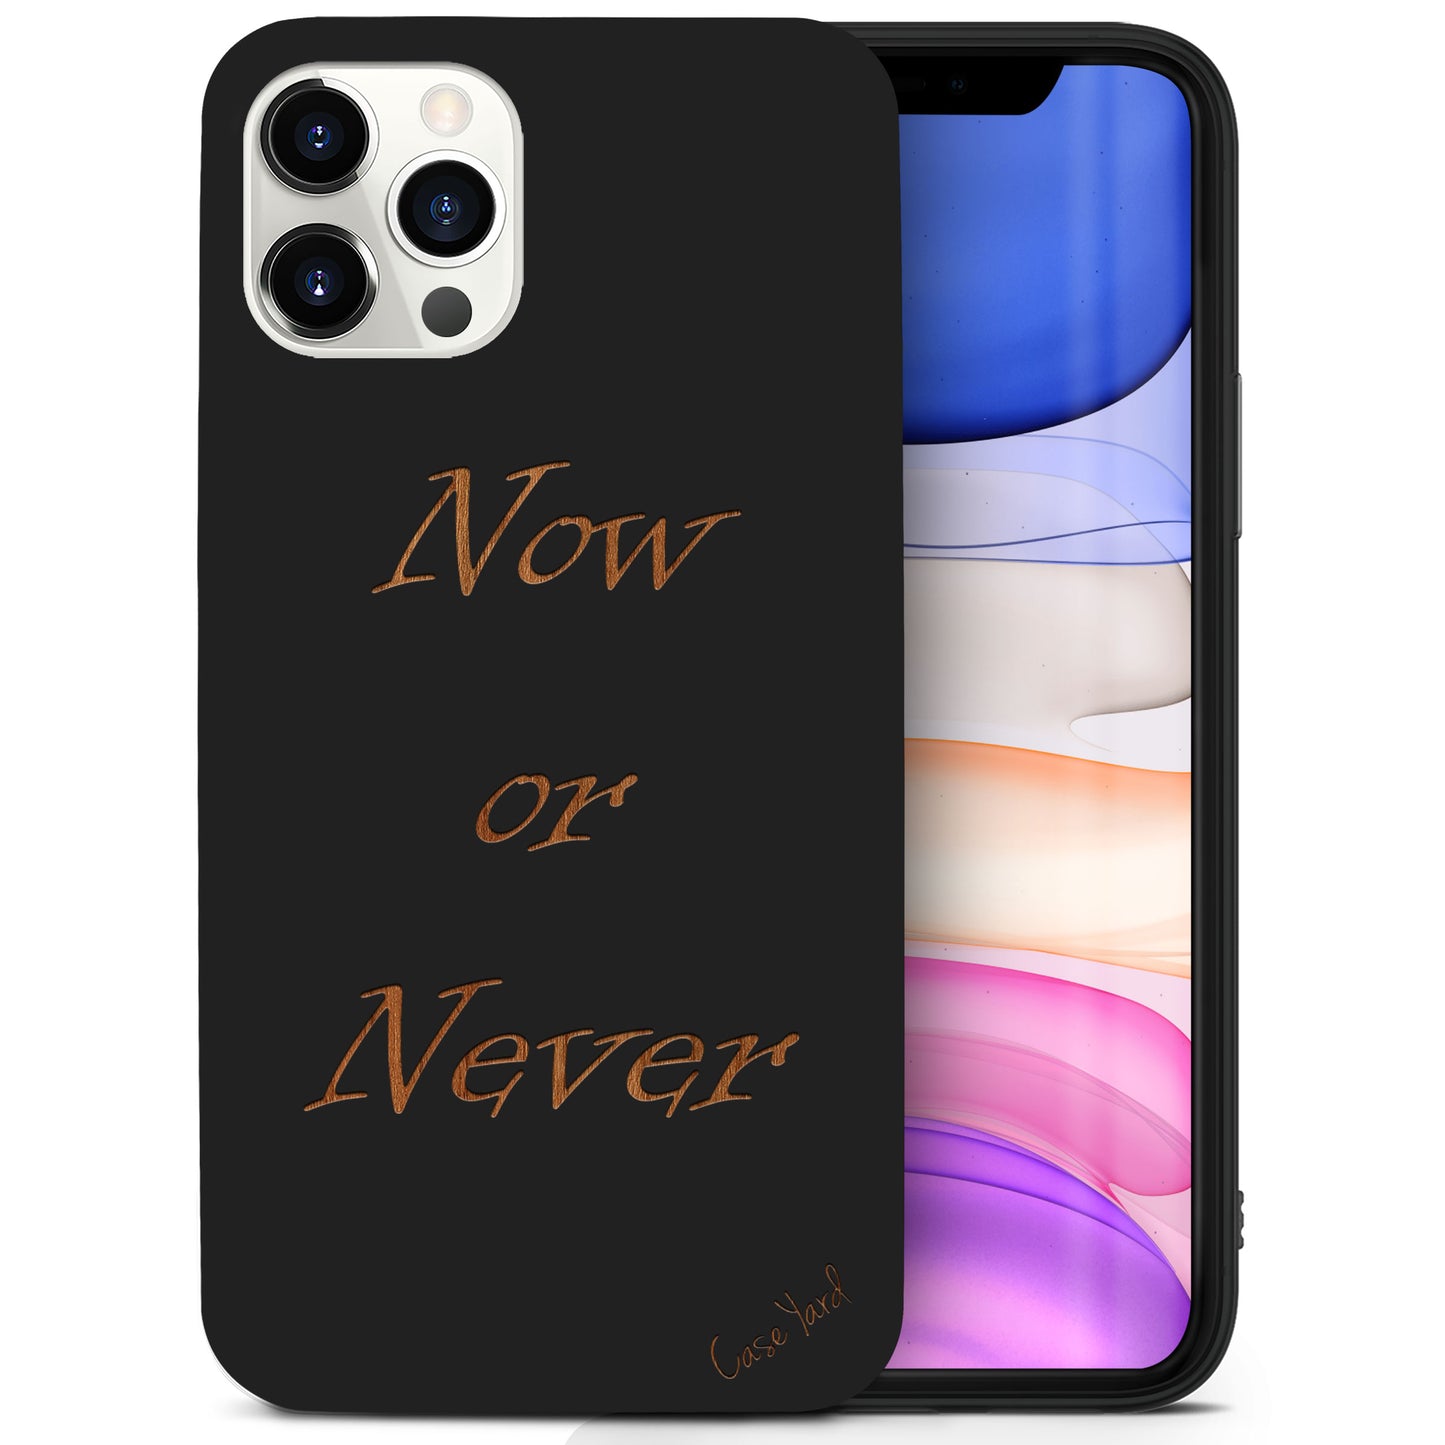 Wooden Cell Phone Case Cover, Laser Engraved case for iPhone & Samsung phone Now or Never Design